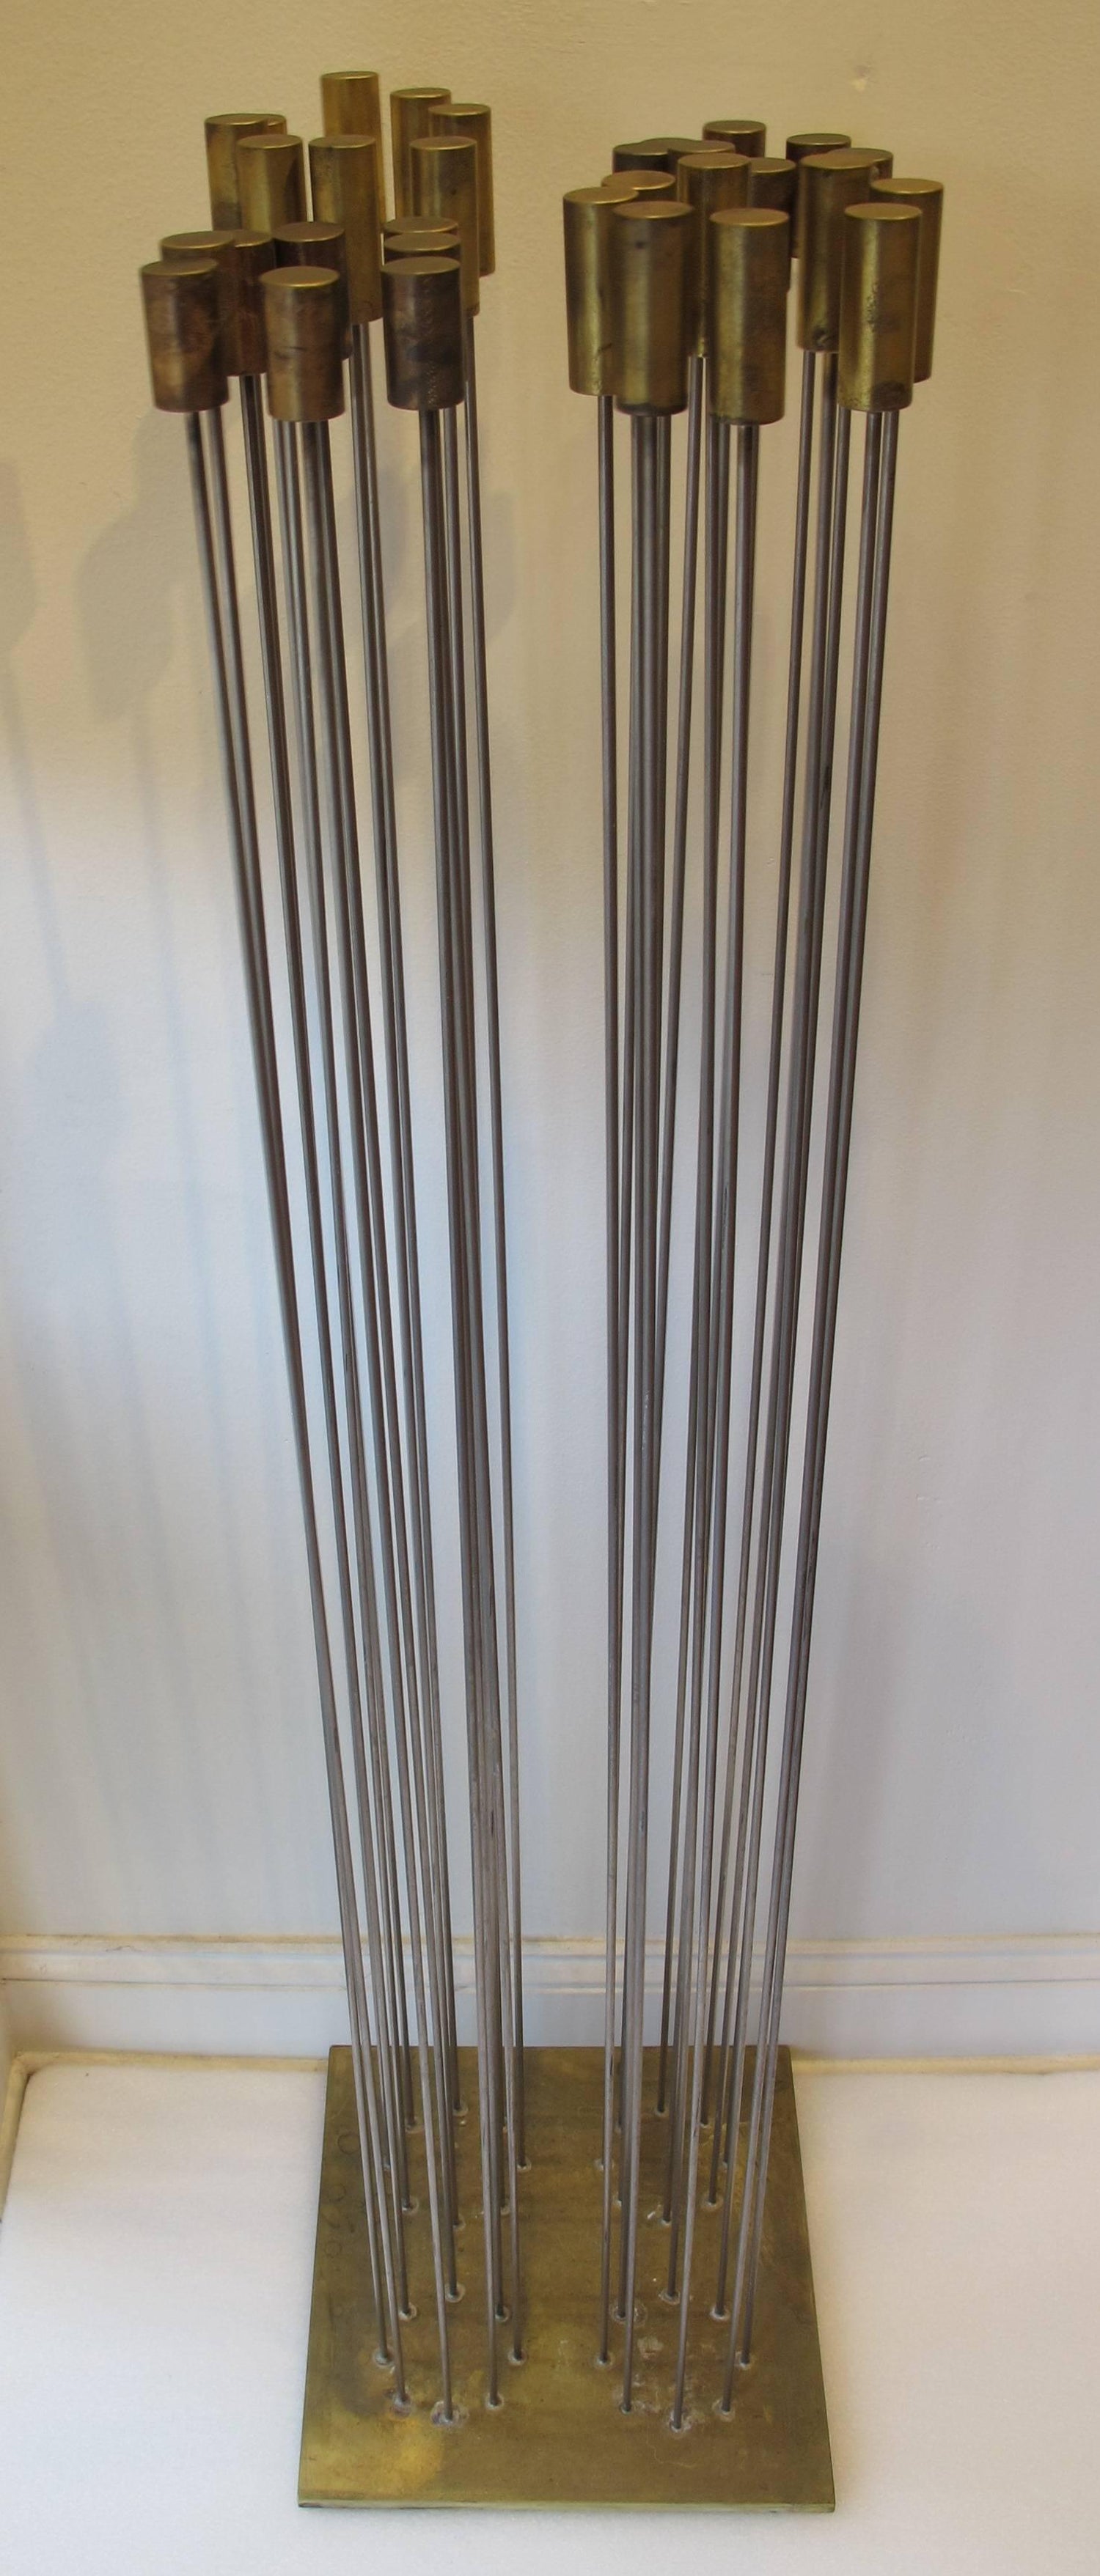 Val Bertoia - "Array of Steel Rods with Brass Chimes" For Sale at 1stDibs